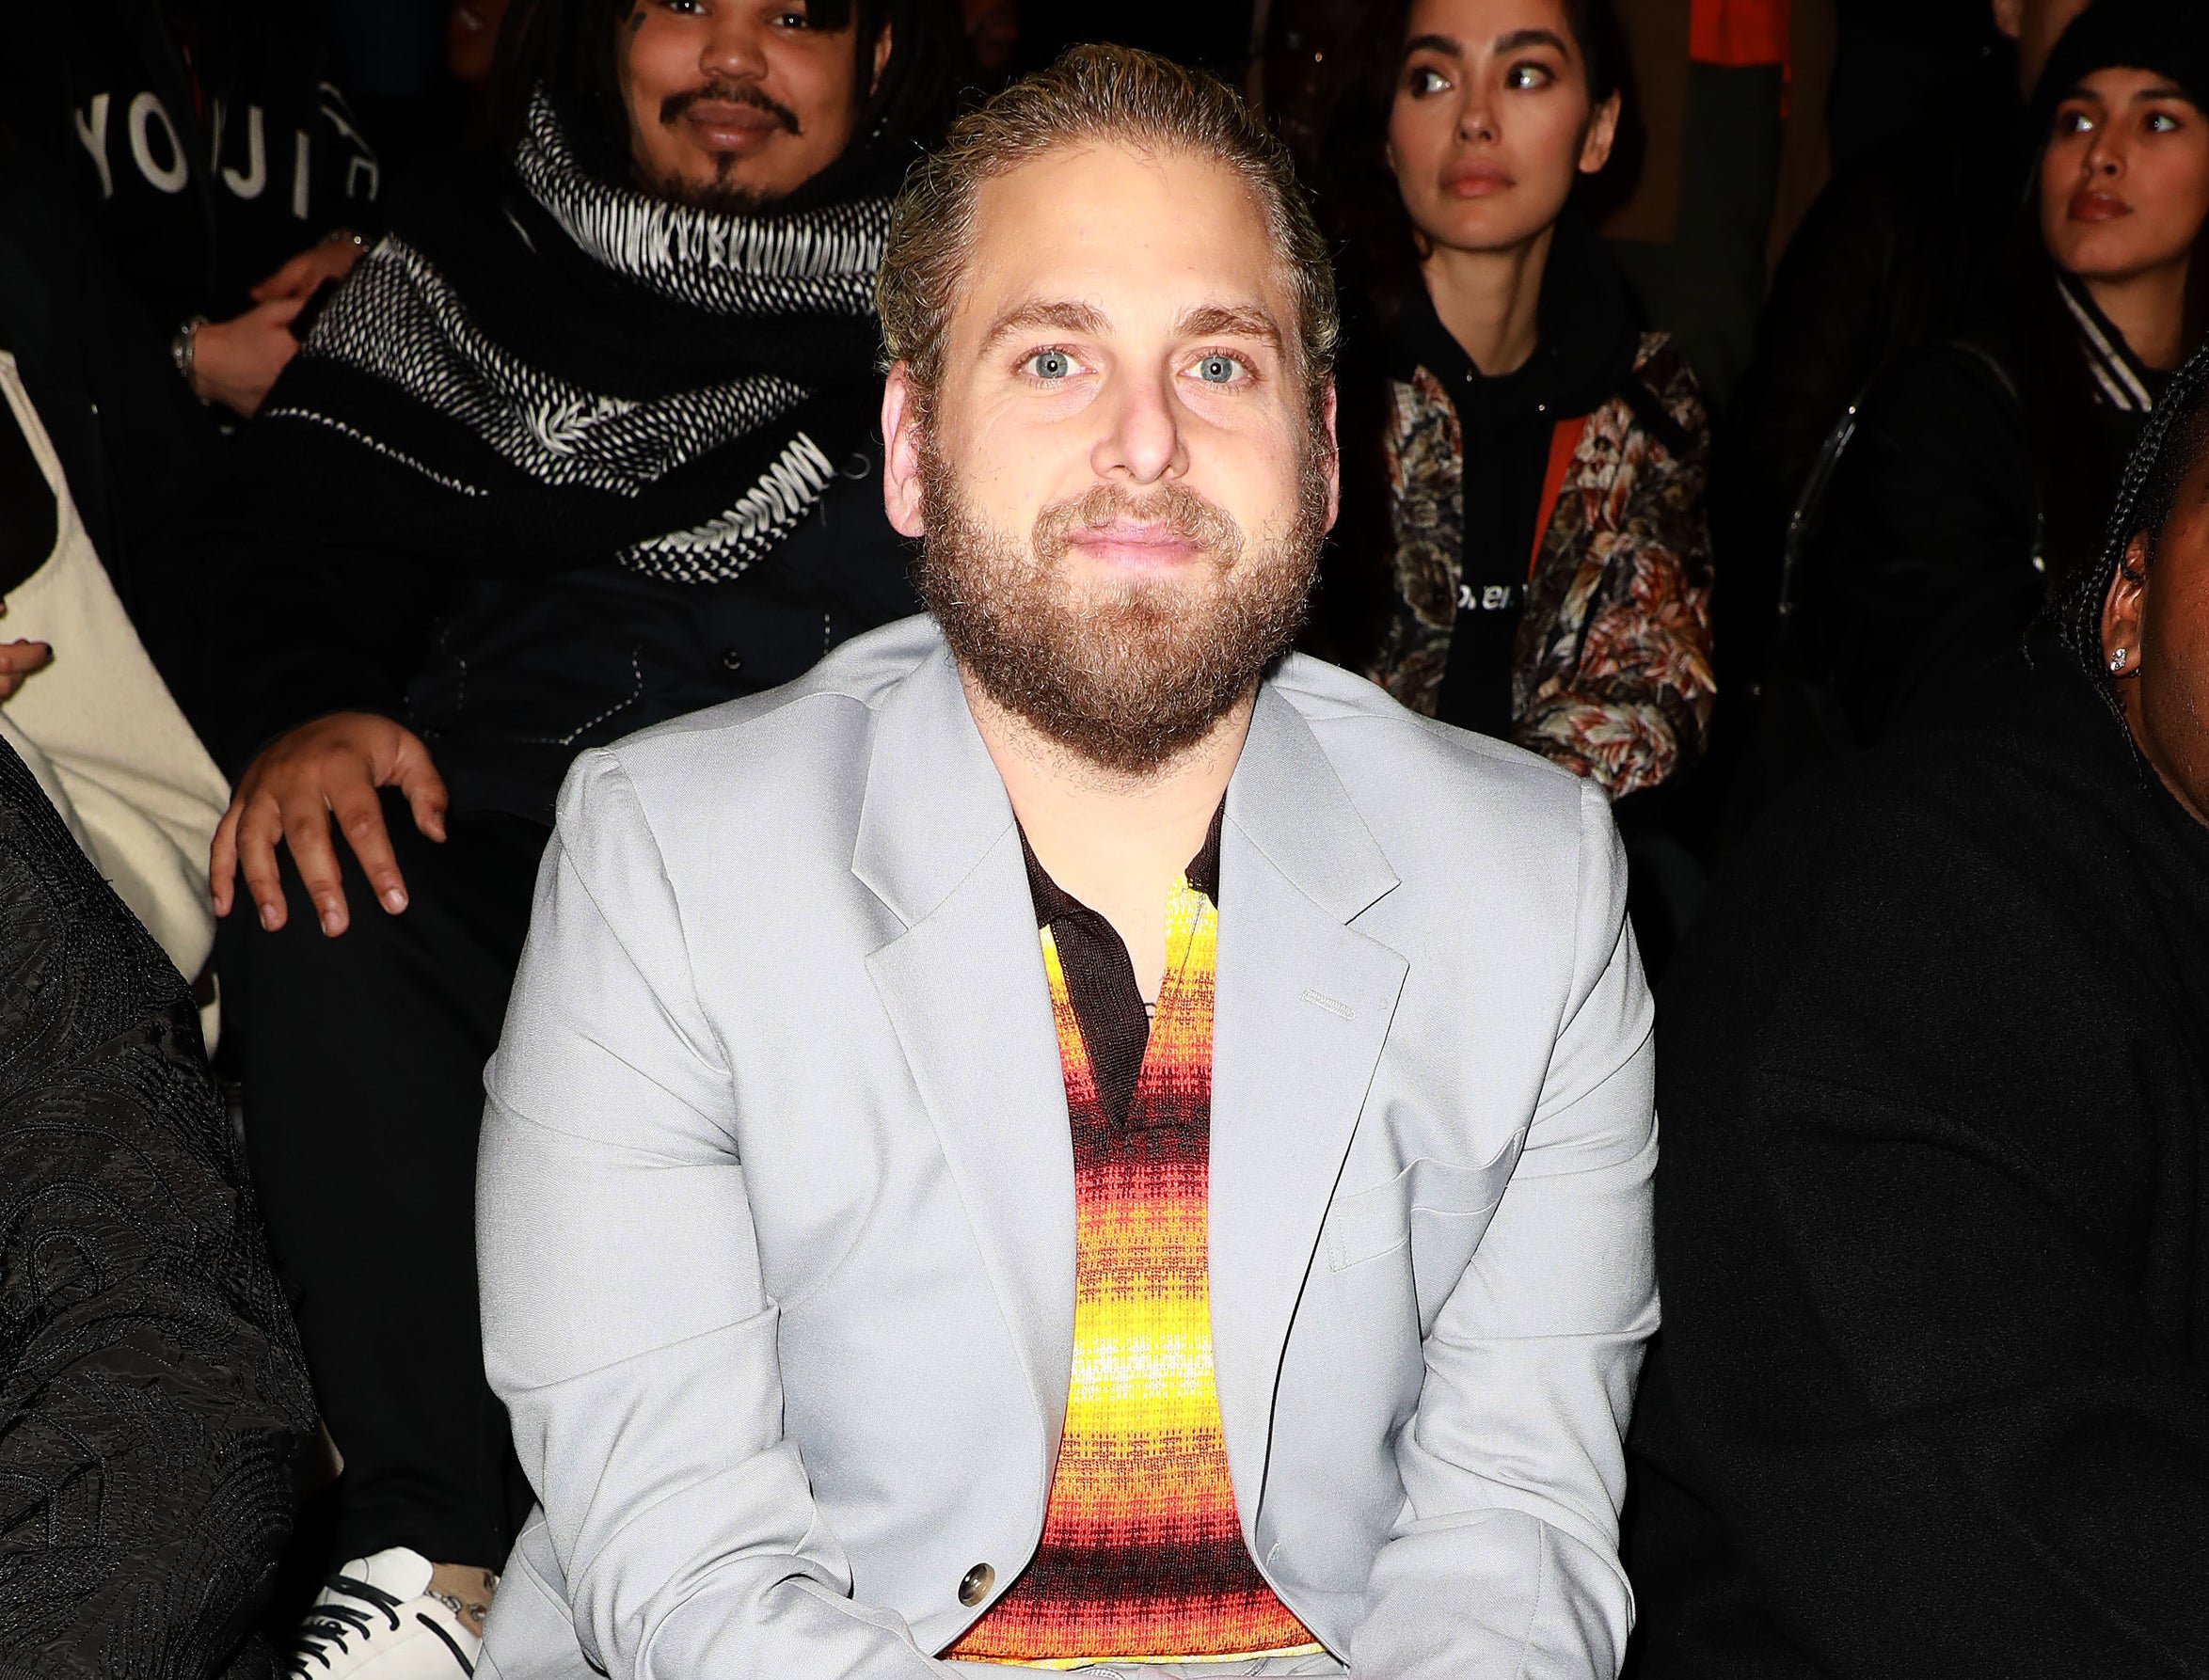 Jonah wears a grey suit with a yellow and orange knit polo underneath